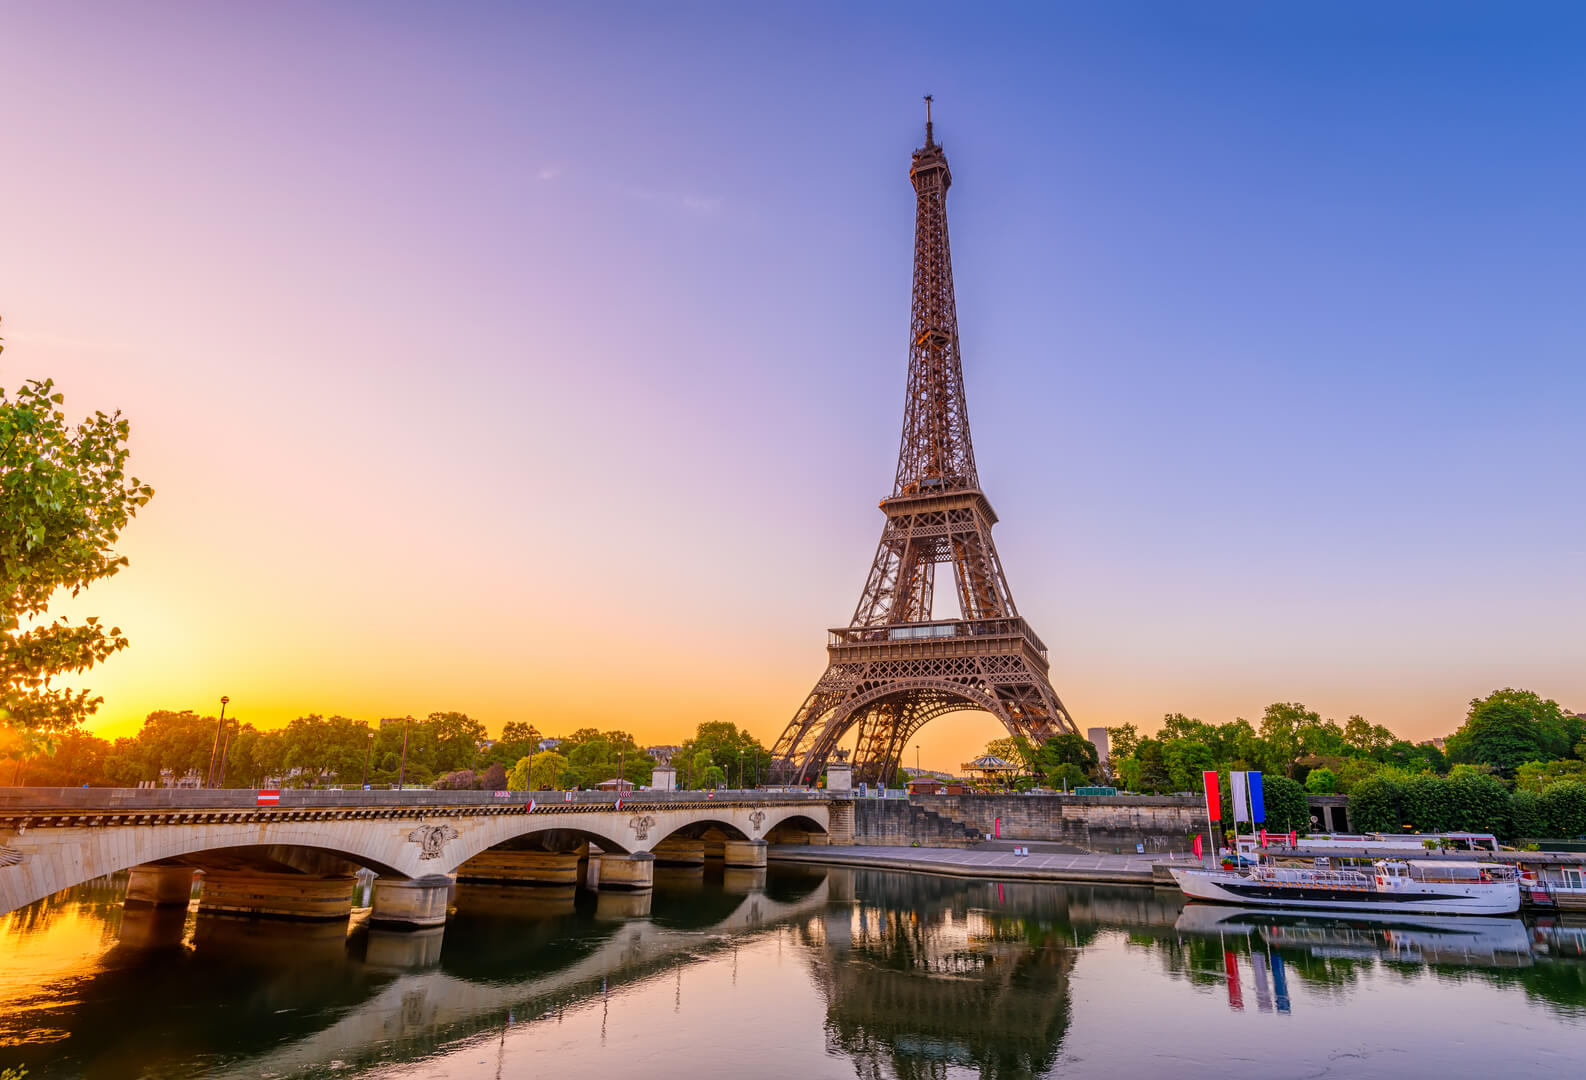 View of Eiffel Tower and river Seine at sunrise in Paris, France. Eiffel Tower is one of the most iconic landmarks of Paris. Architecture and landmarks of Paris. Postcard of Paris